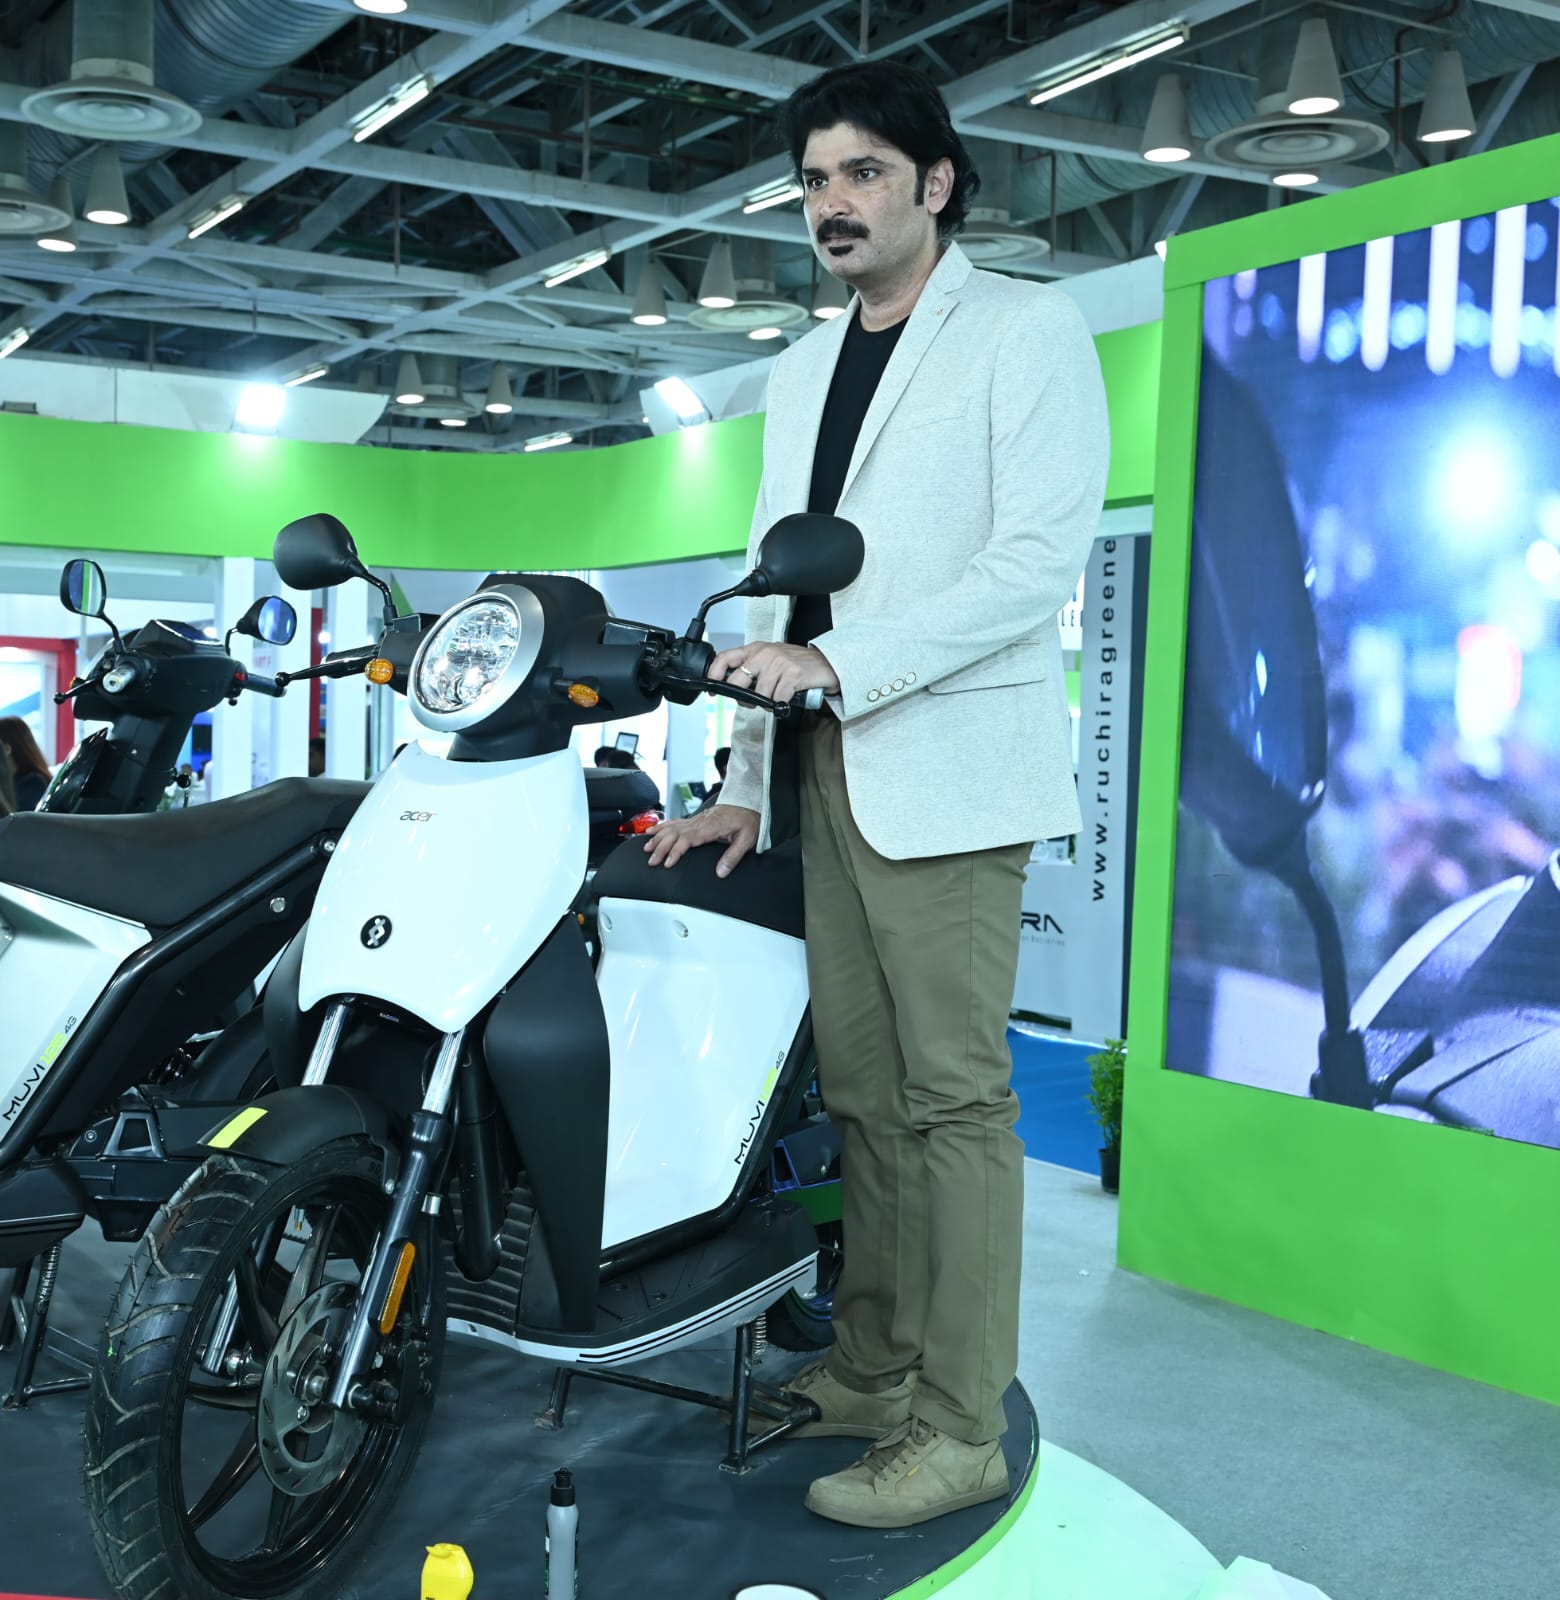 https://e-vehicleinfo.com/acer-showcased-muvi-125-4g-electric-scooter/